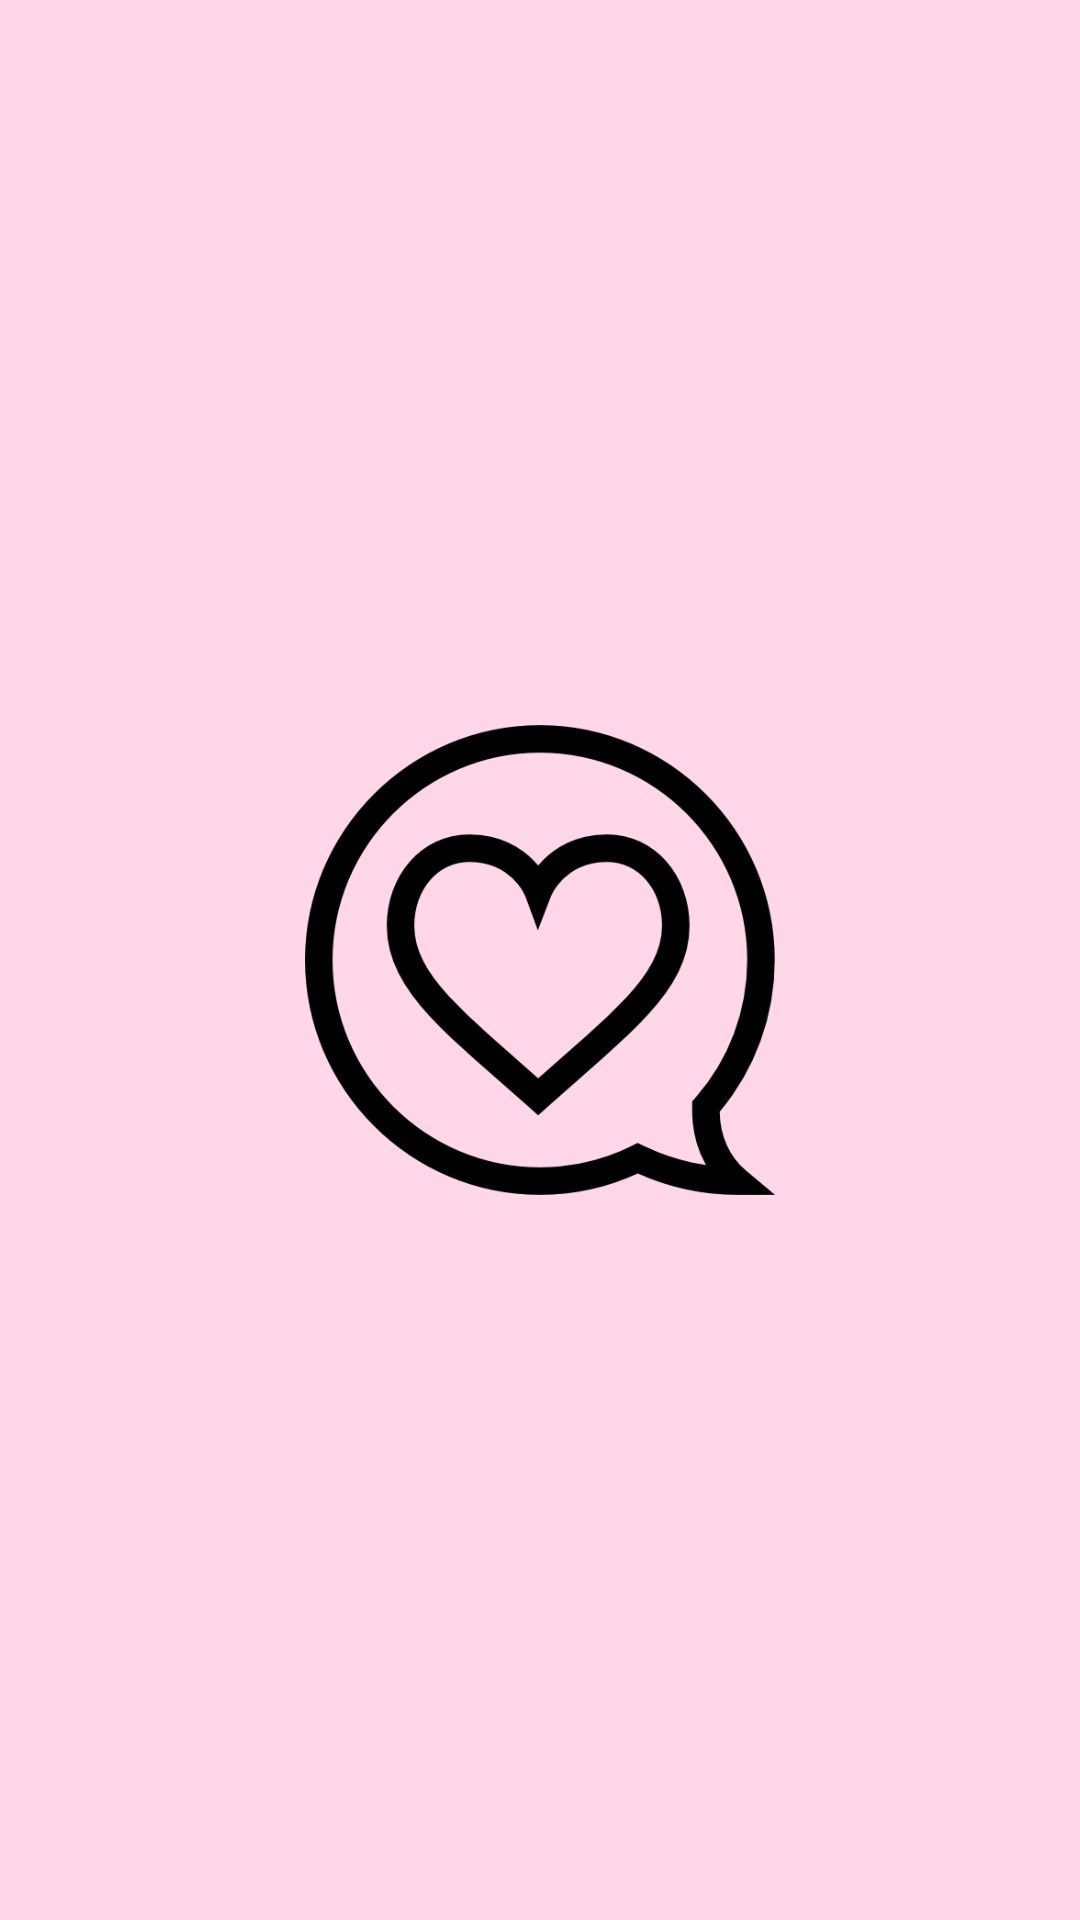 A black heart outline in a speech bubble on a light pink background - Pink, love